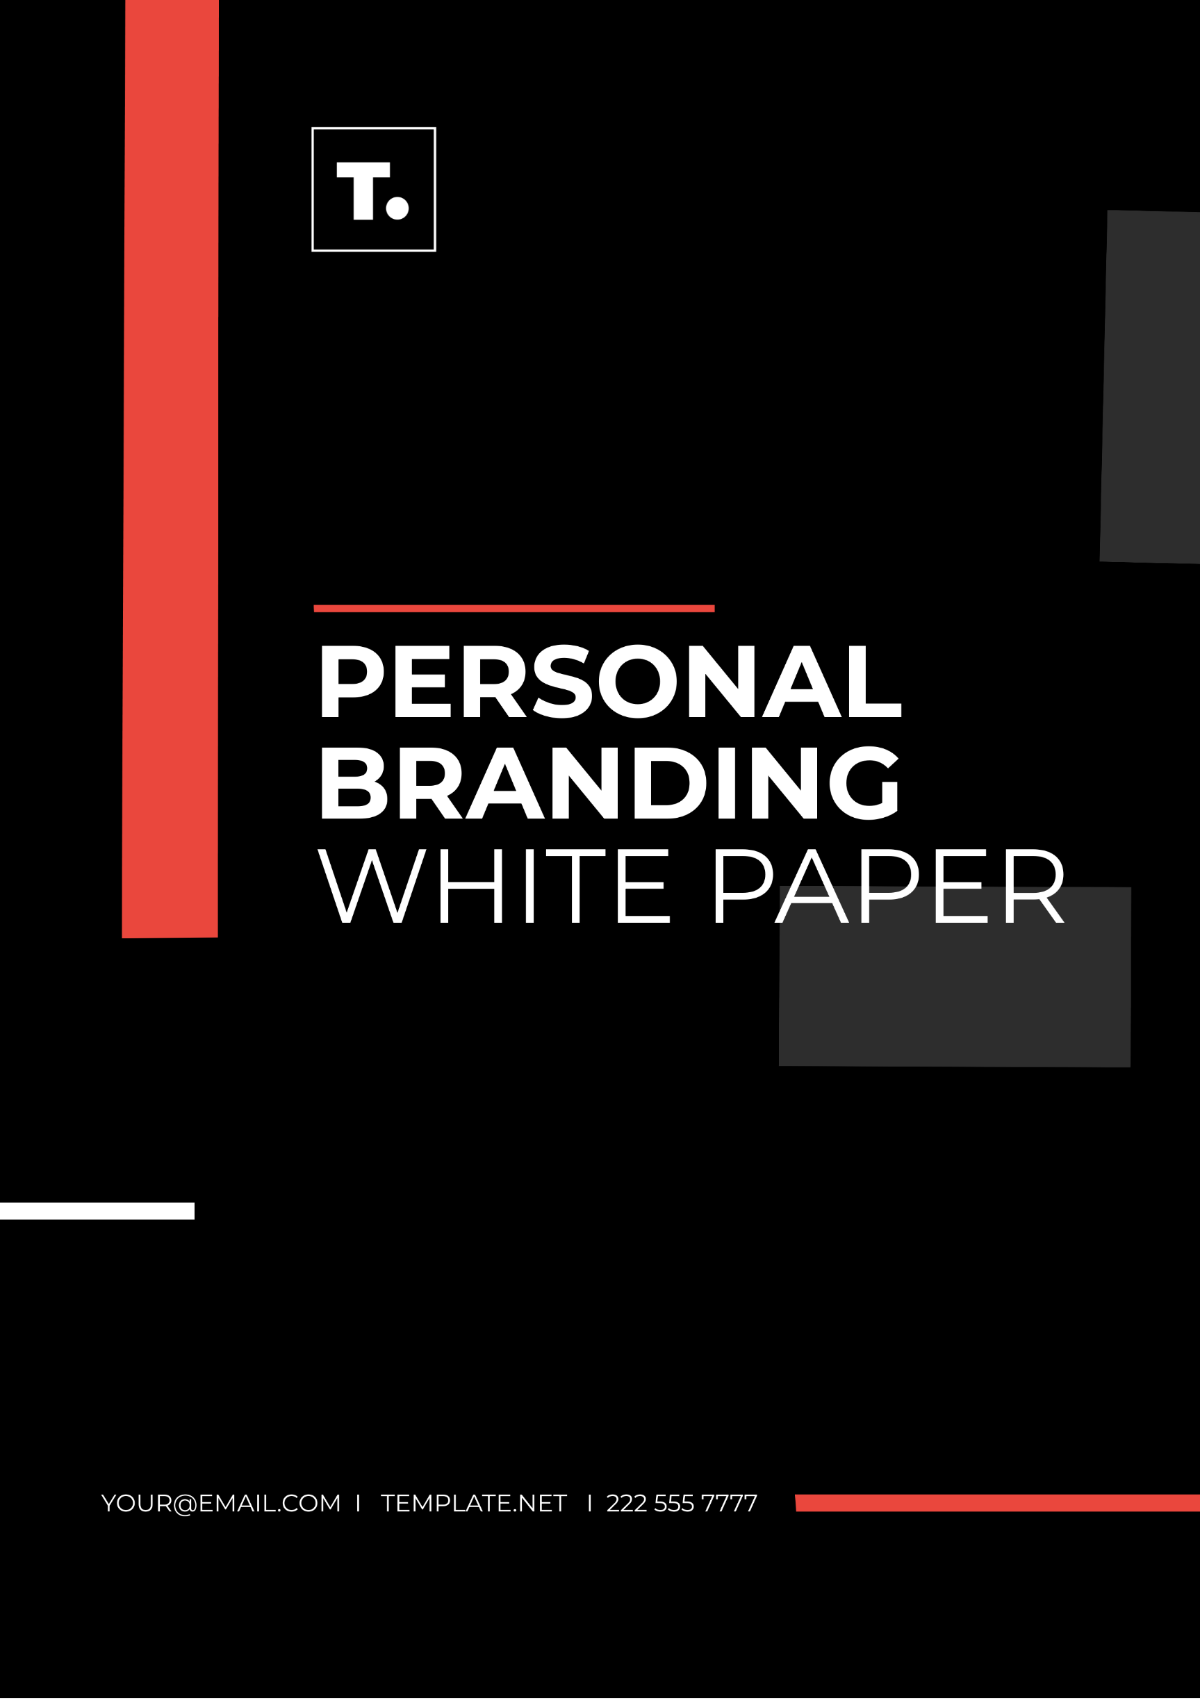 Personal Branding White Paper Template